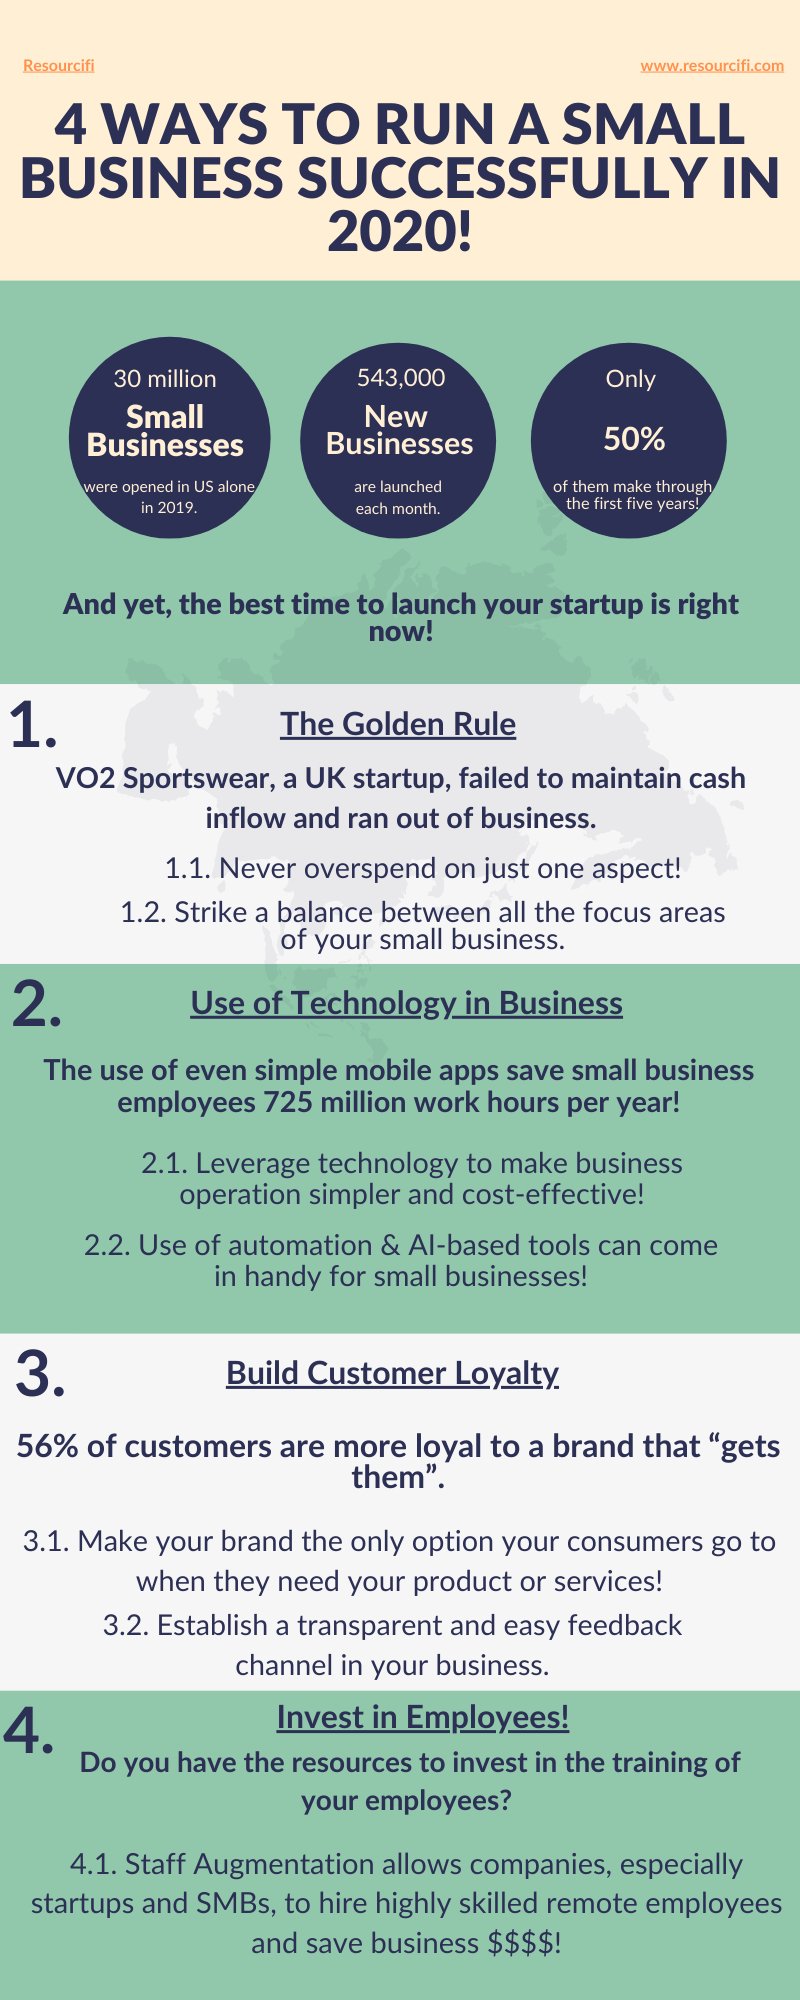 4 Ways to Run a Small Business Successfully in 2020